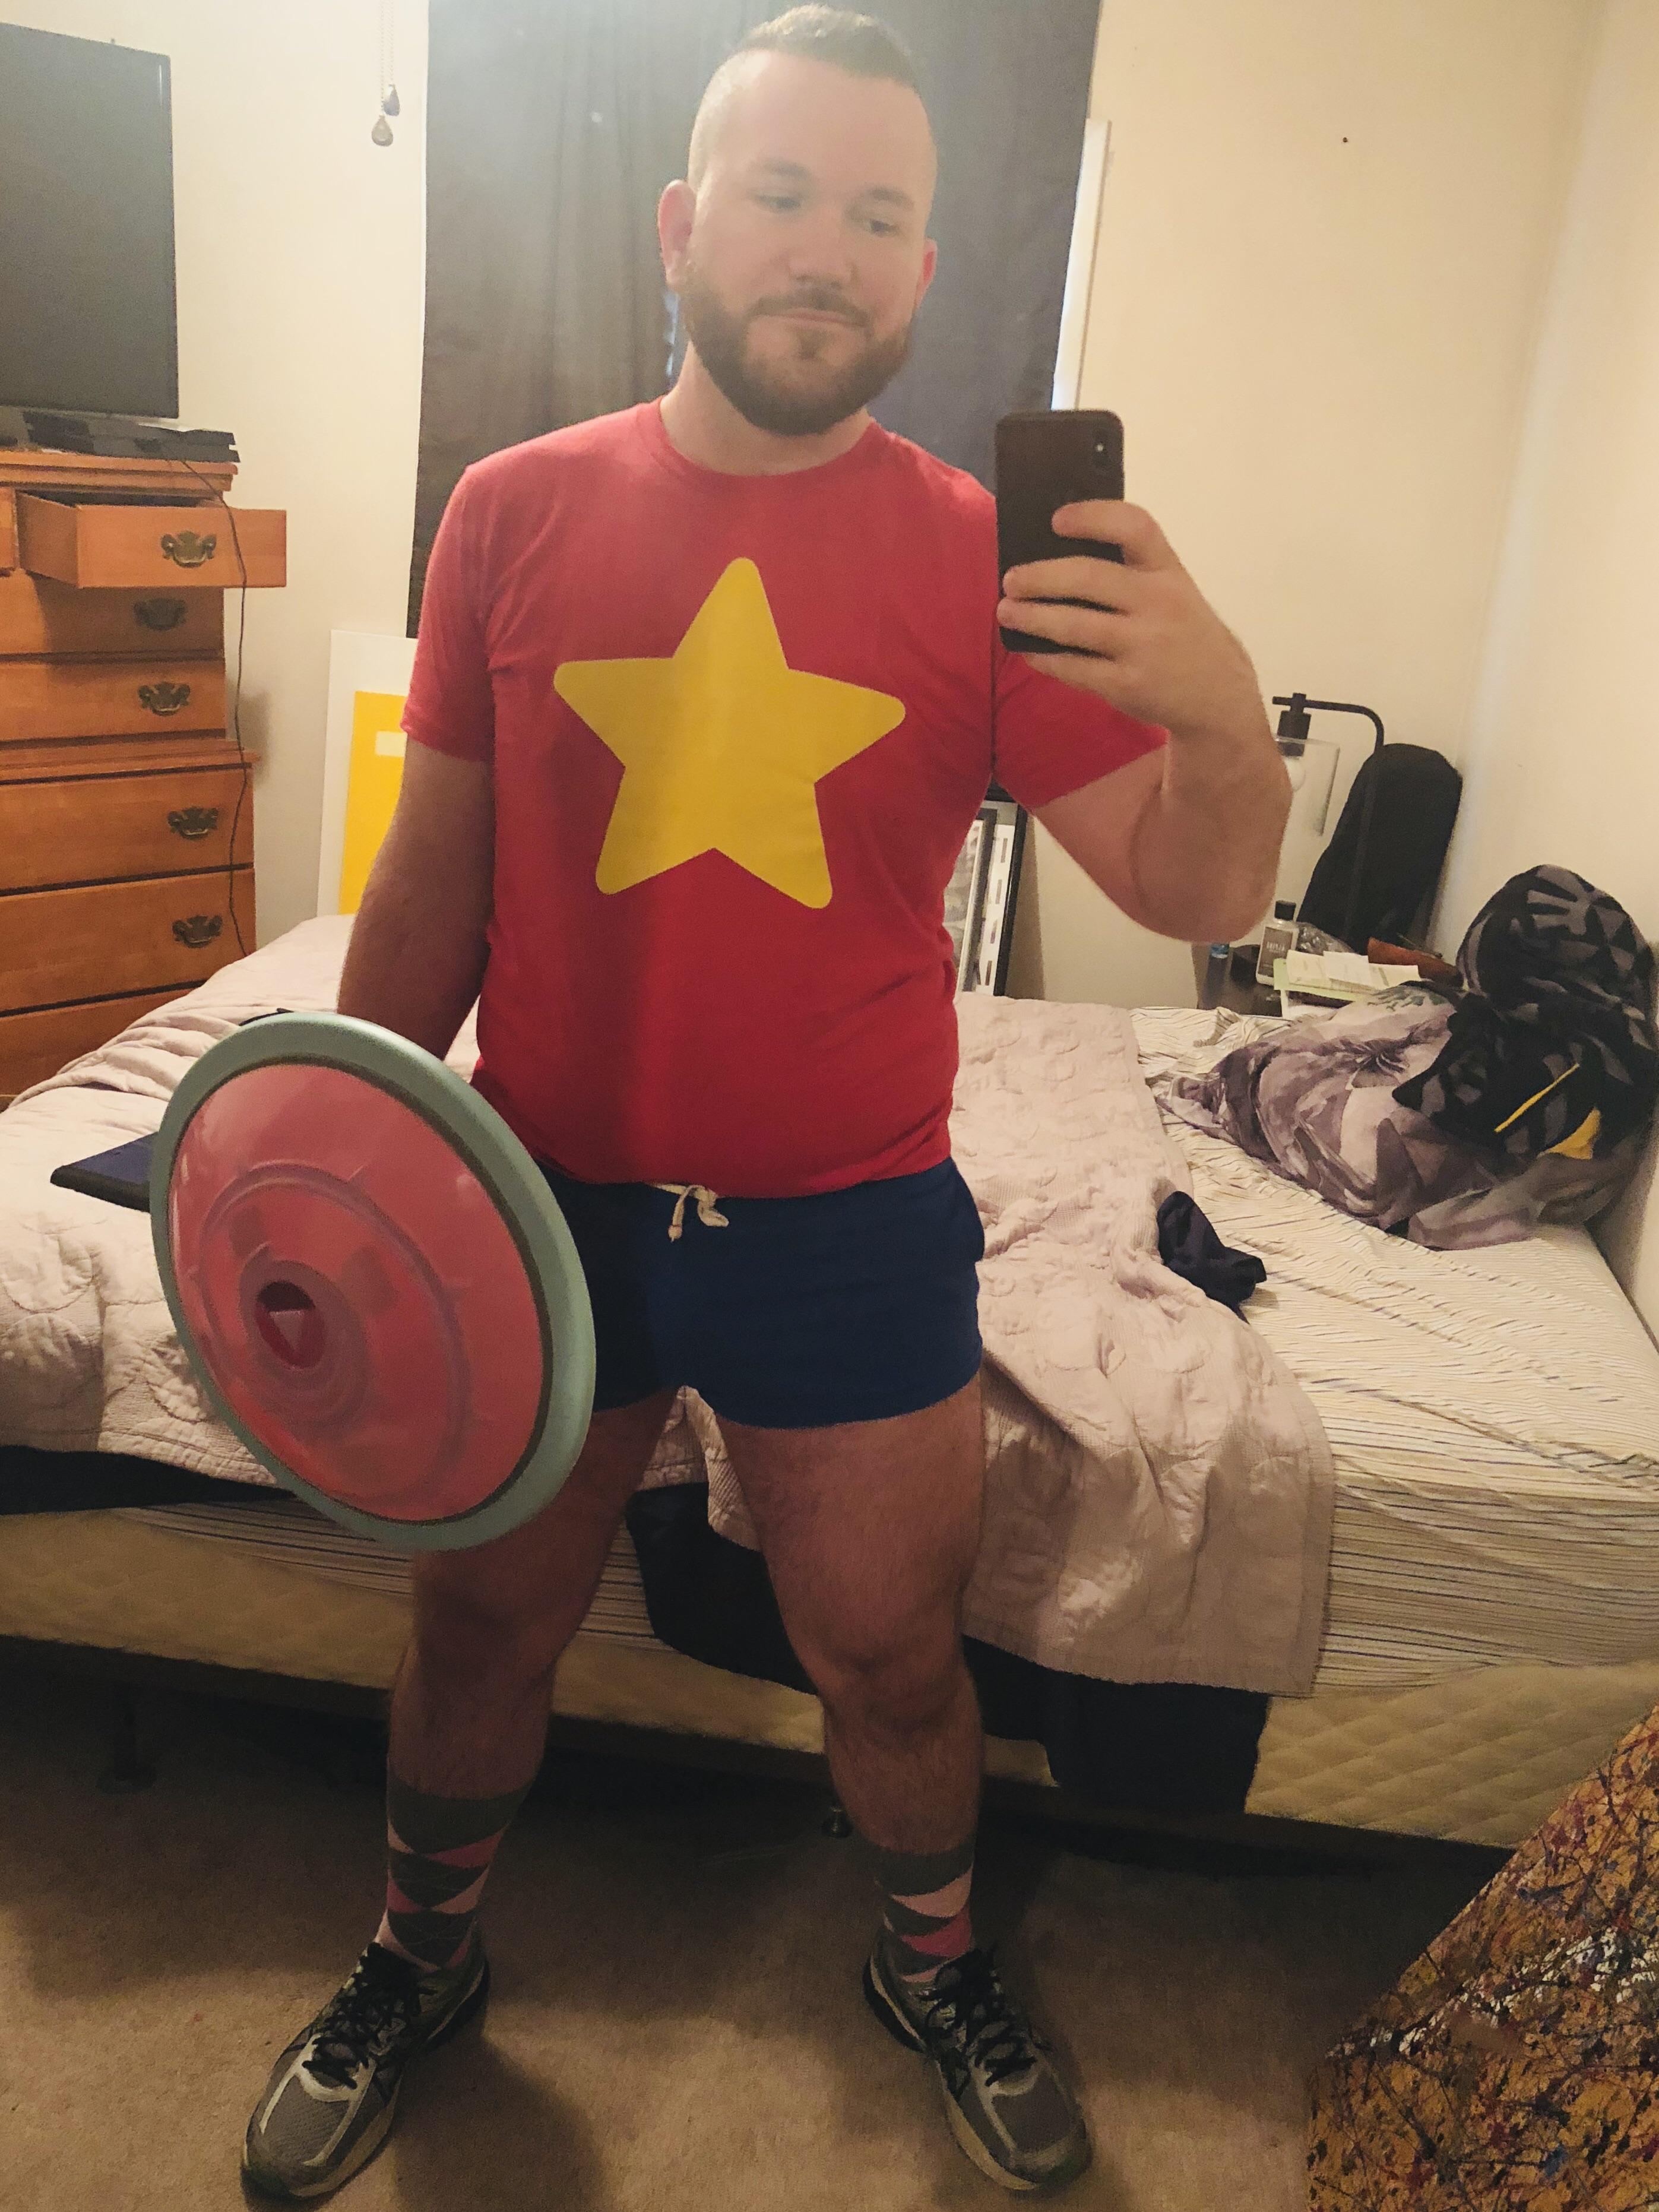 Went as Steven Universe for Halloween last night! Any fans out there?